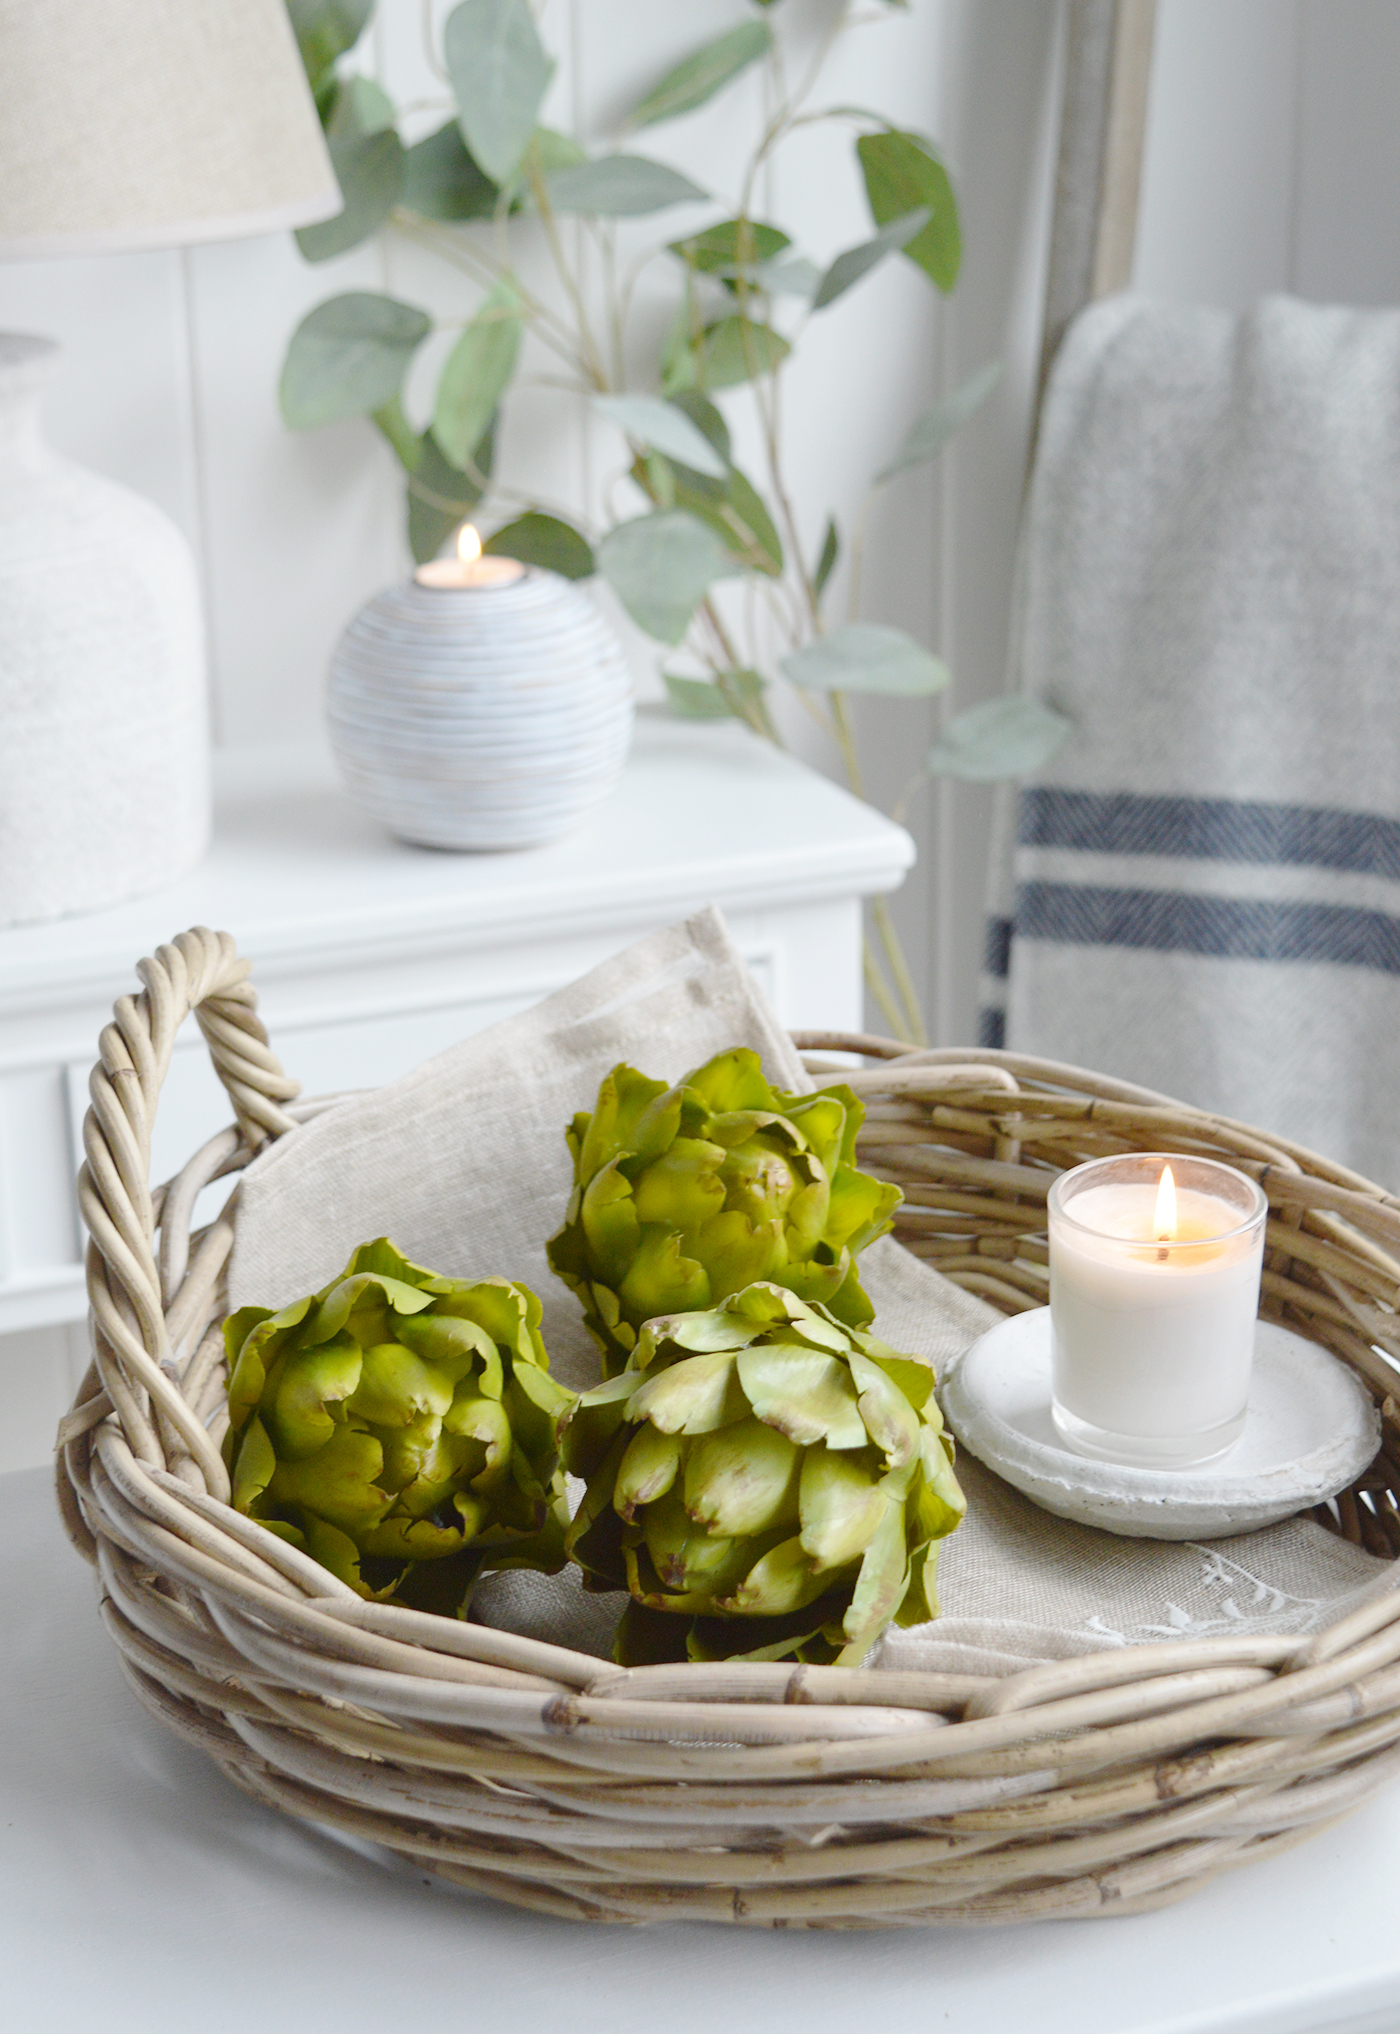 Faux green realisitic artichokes in the Casco Bay basket for Coastal style interiors.